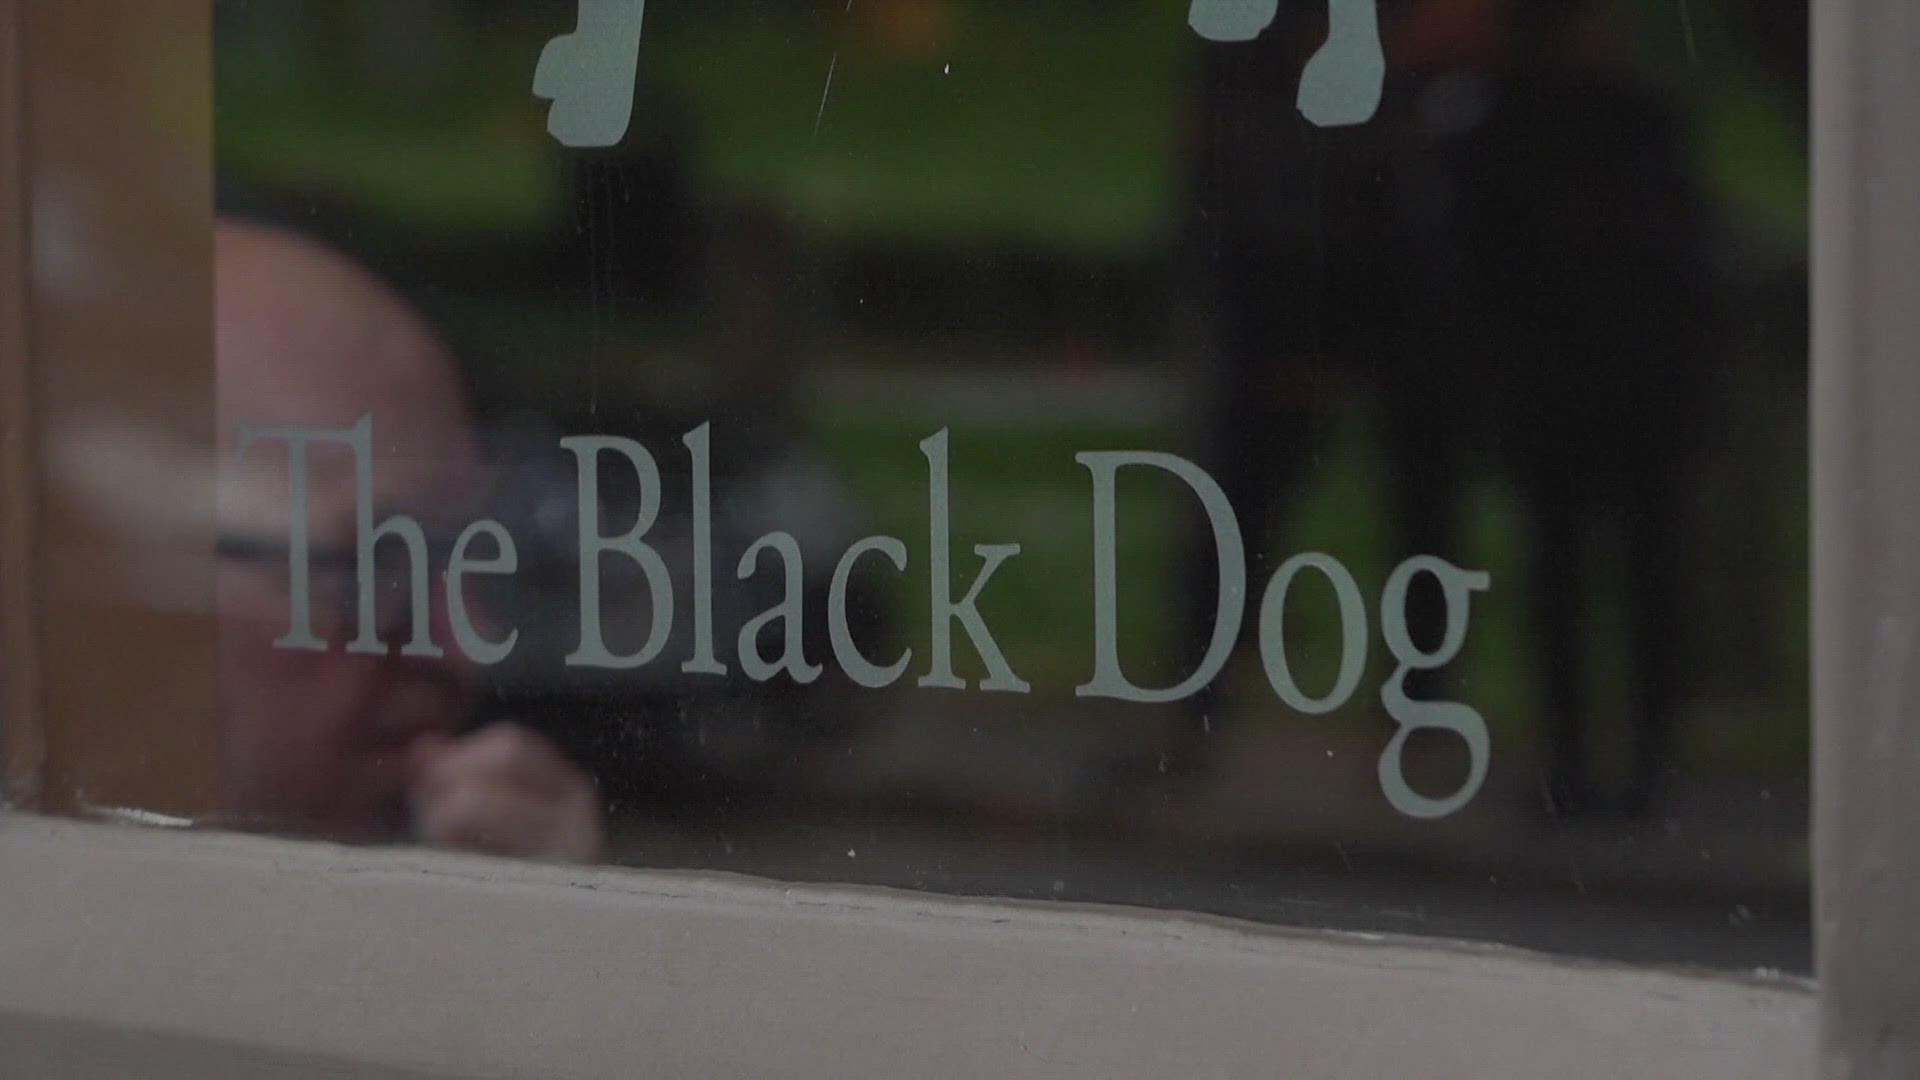 The Black Dog said the buzz started online a week before "The Tortured Poet's Department" was released.